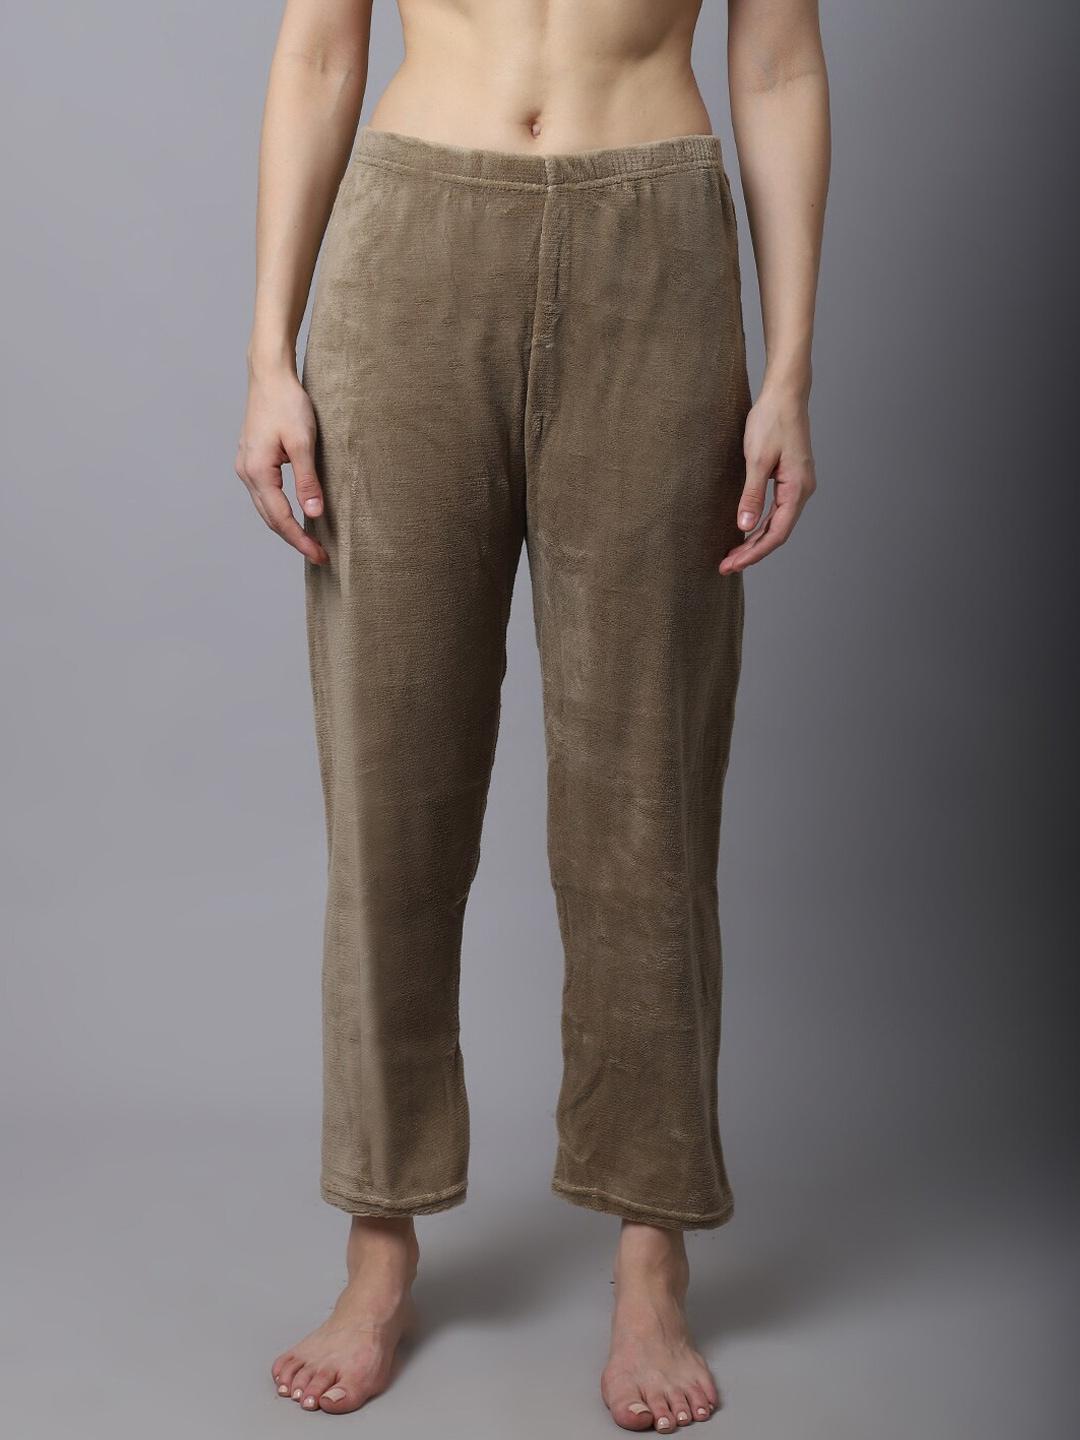 tag-7-women-olive-coloured-fur-winter-lounge-pants